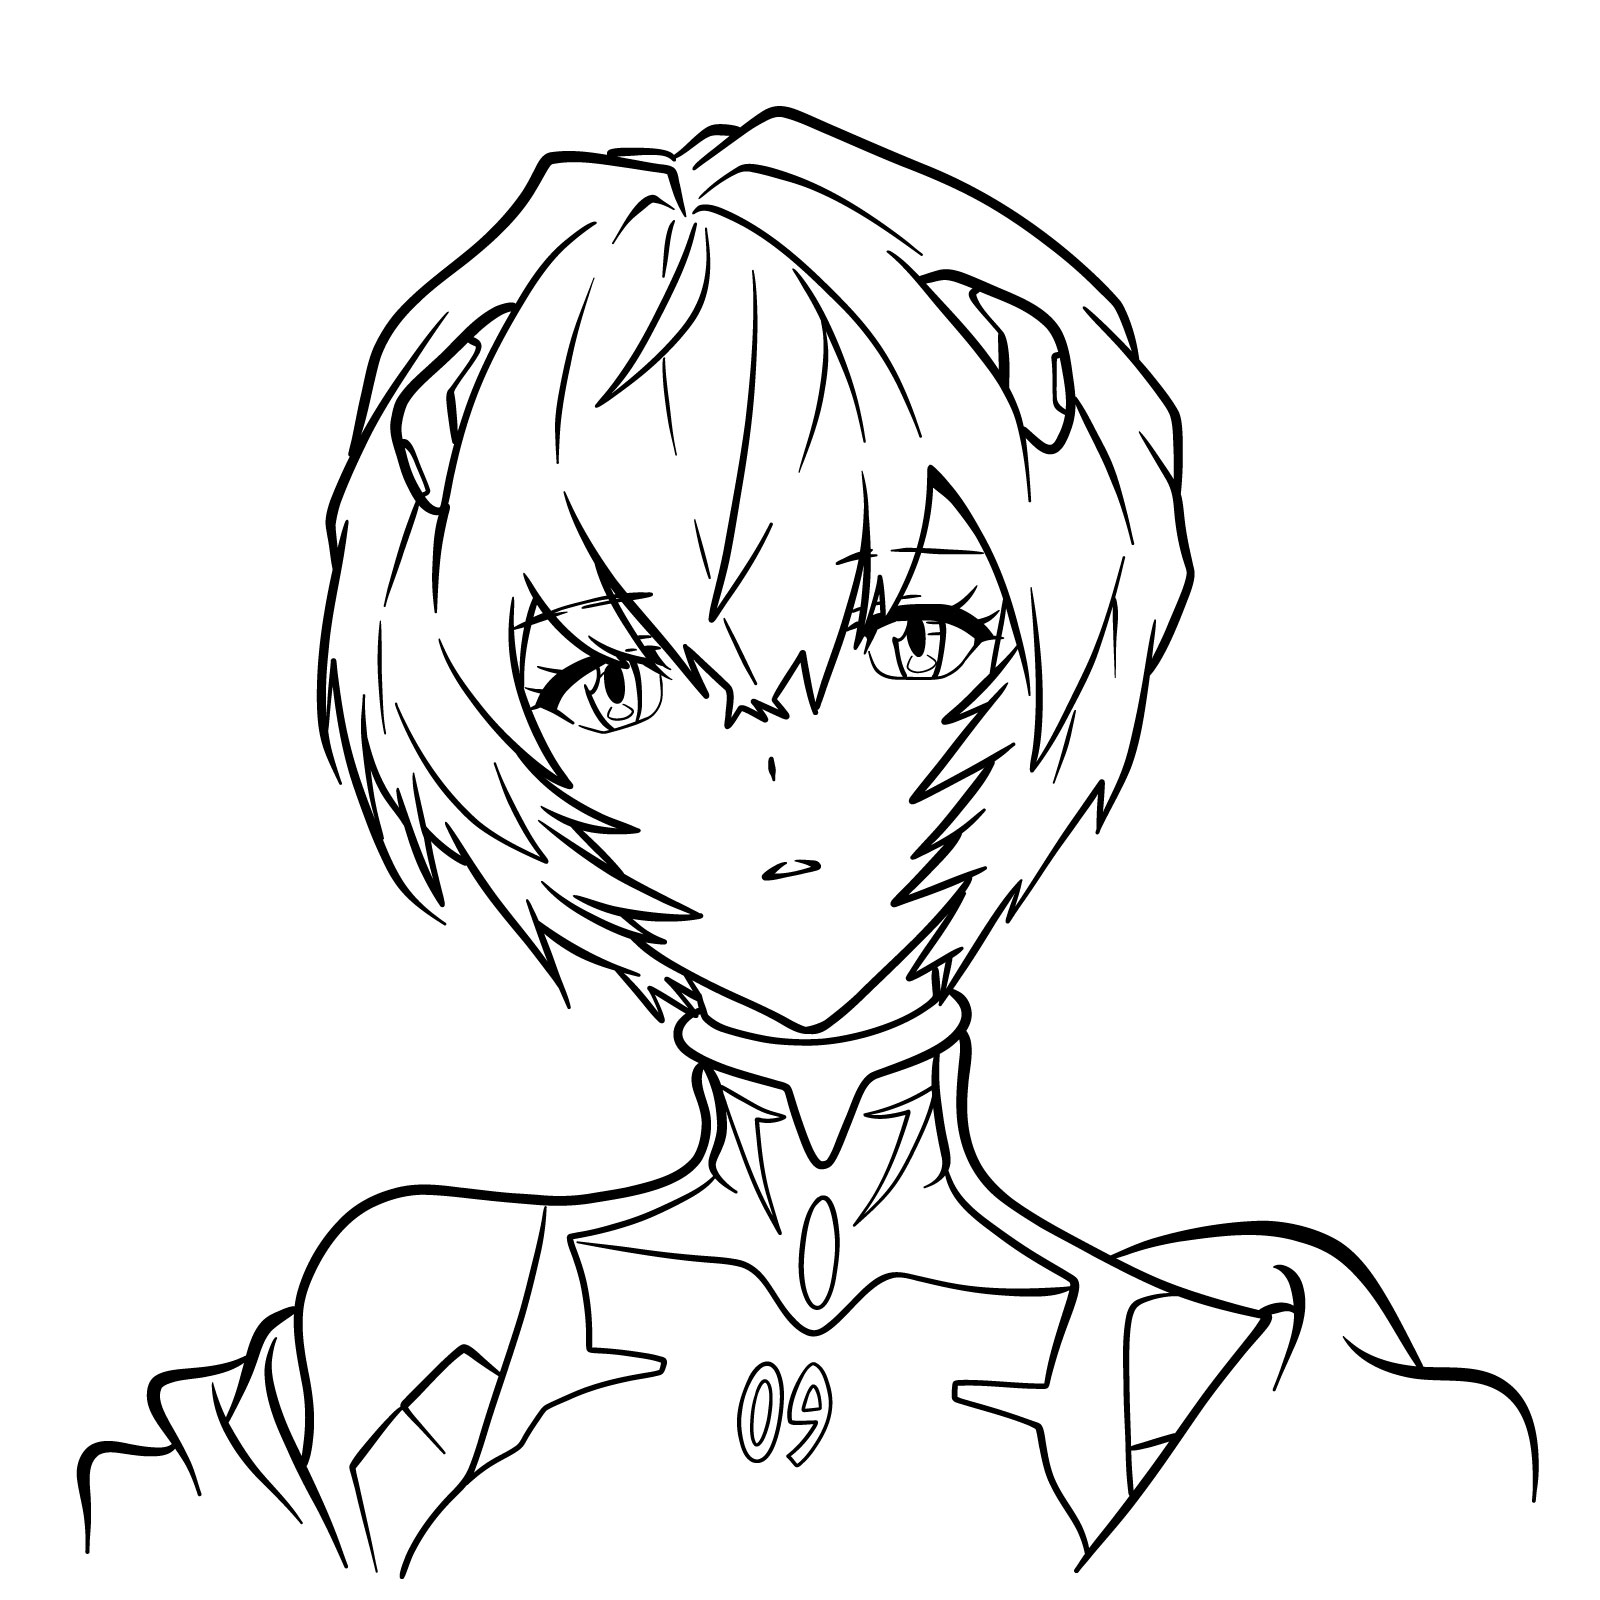 Easy step-by-step drawing of Rei Ayanami's face - Evangelion - final step